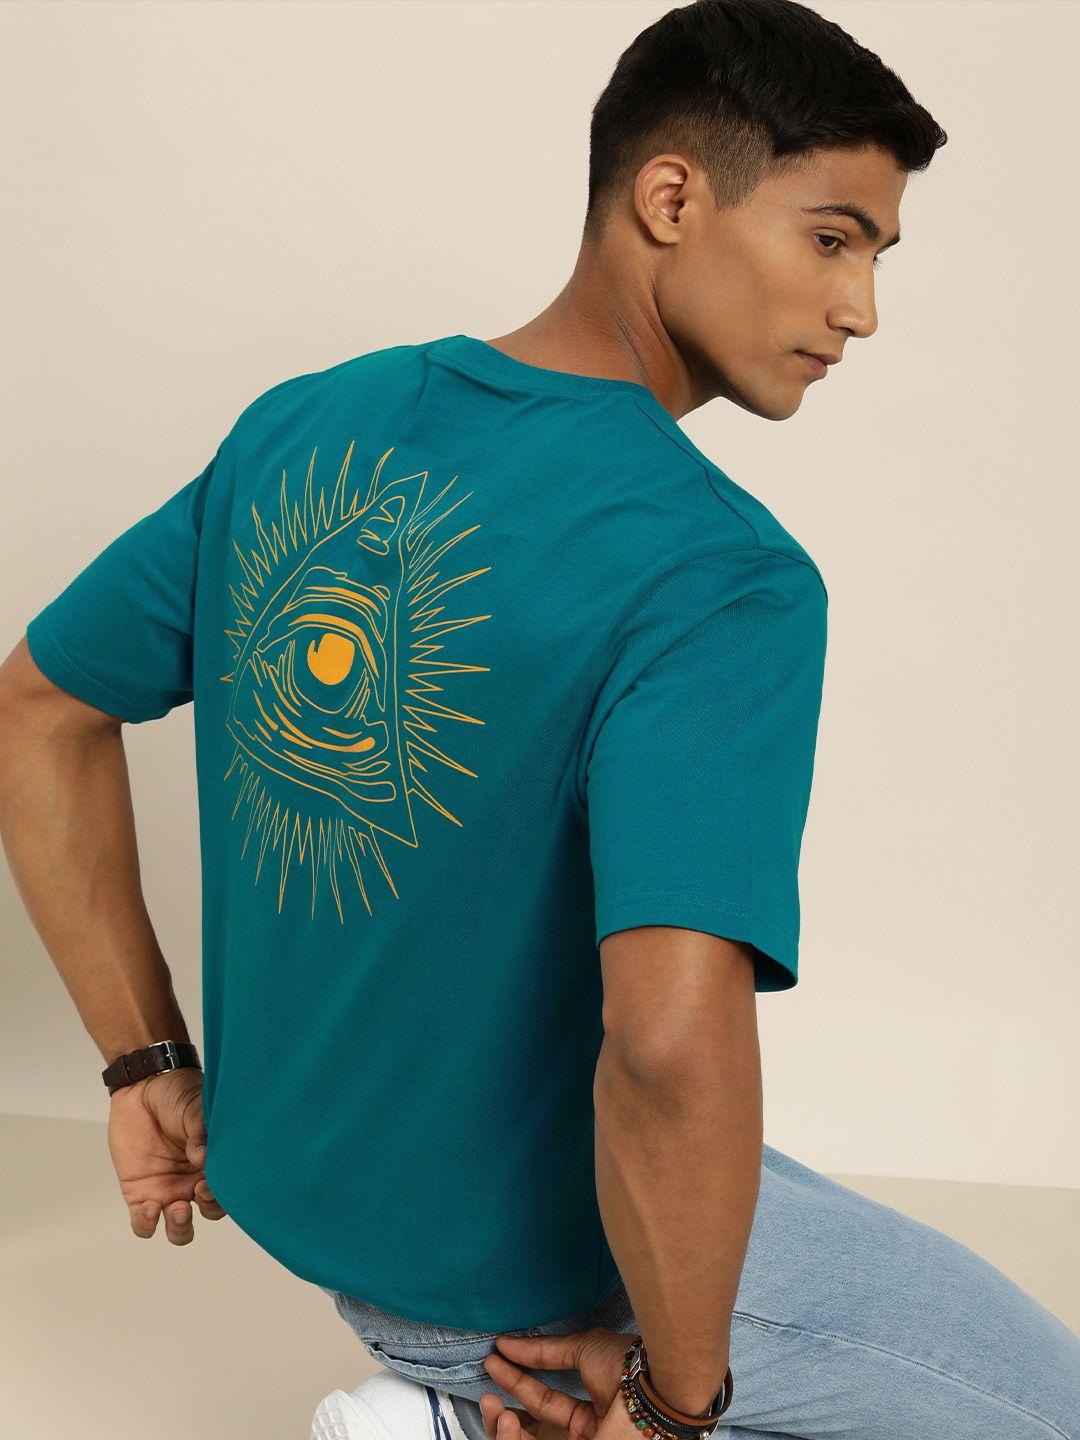 dillinger men teal blue & mustard yellow back graphic printed cotton oversized t-shirt